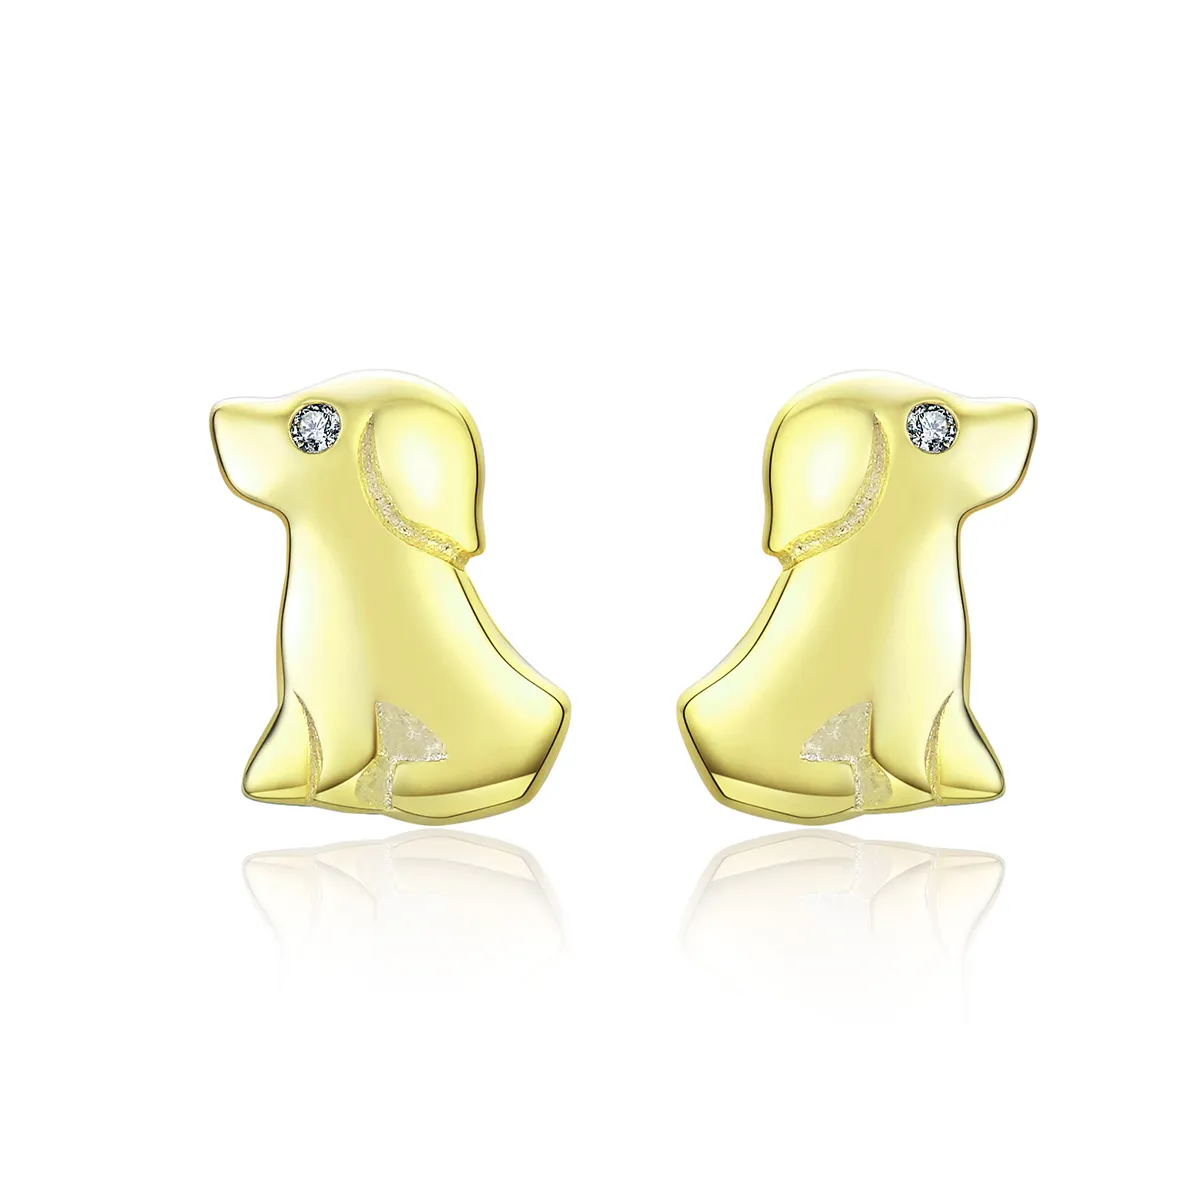 Pandora Style Gold-Plated Puppy Stud Earrings - SCE584-C